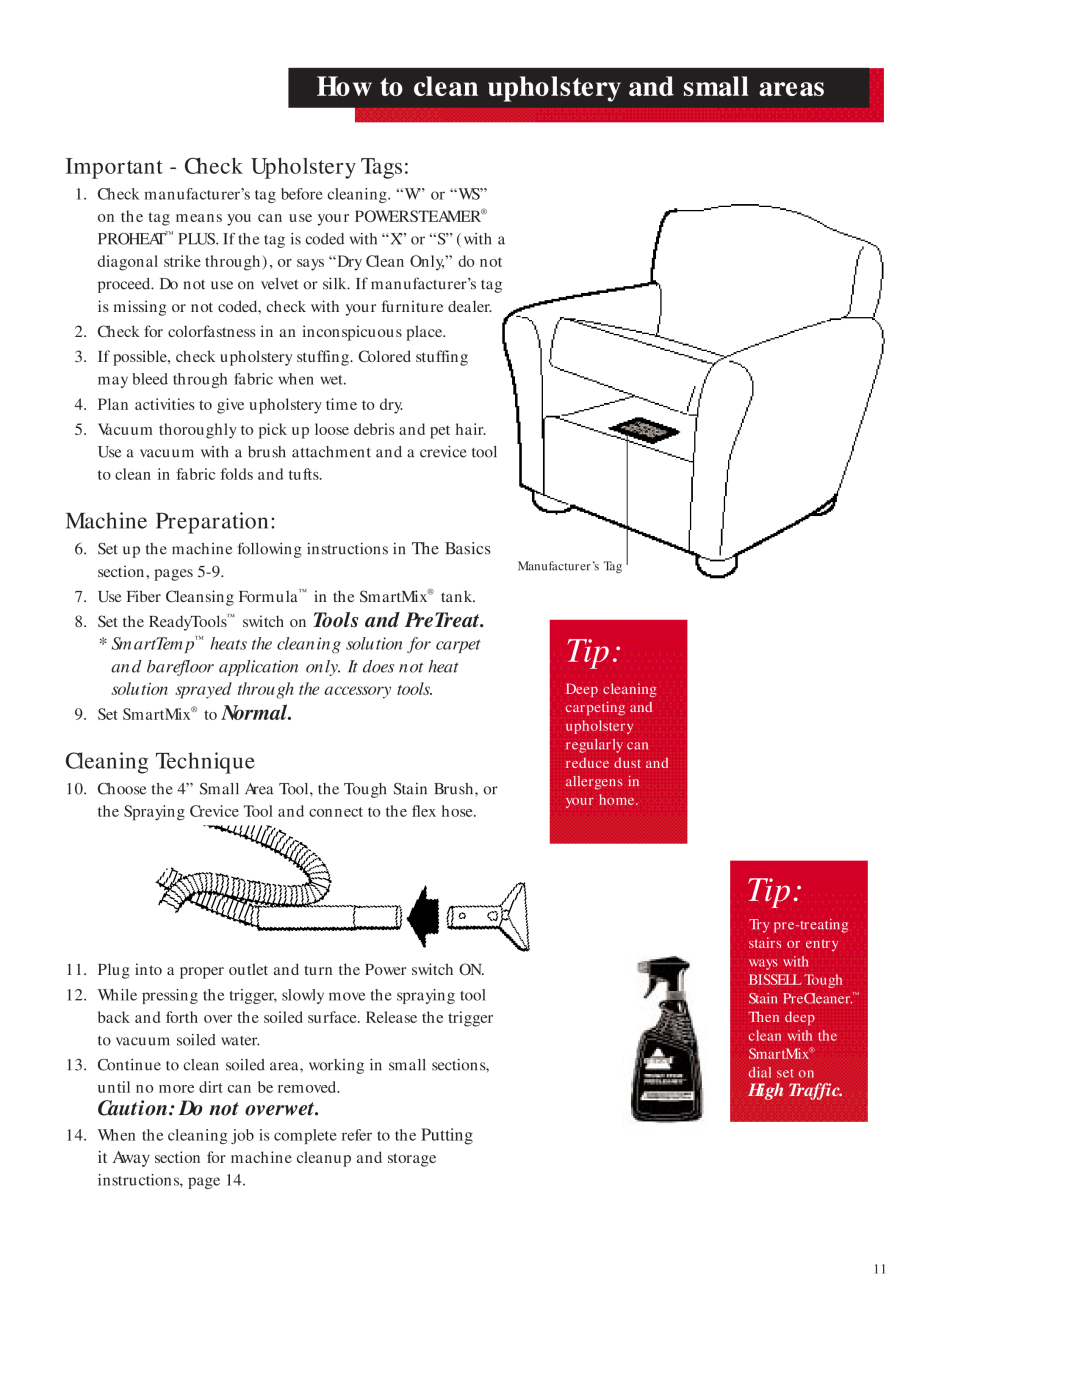 Bissell 16981 warranty How to clean upholstery and small areas, Important - Check Upholstery Tags, Cleaning Technique 